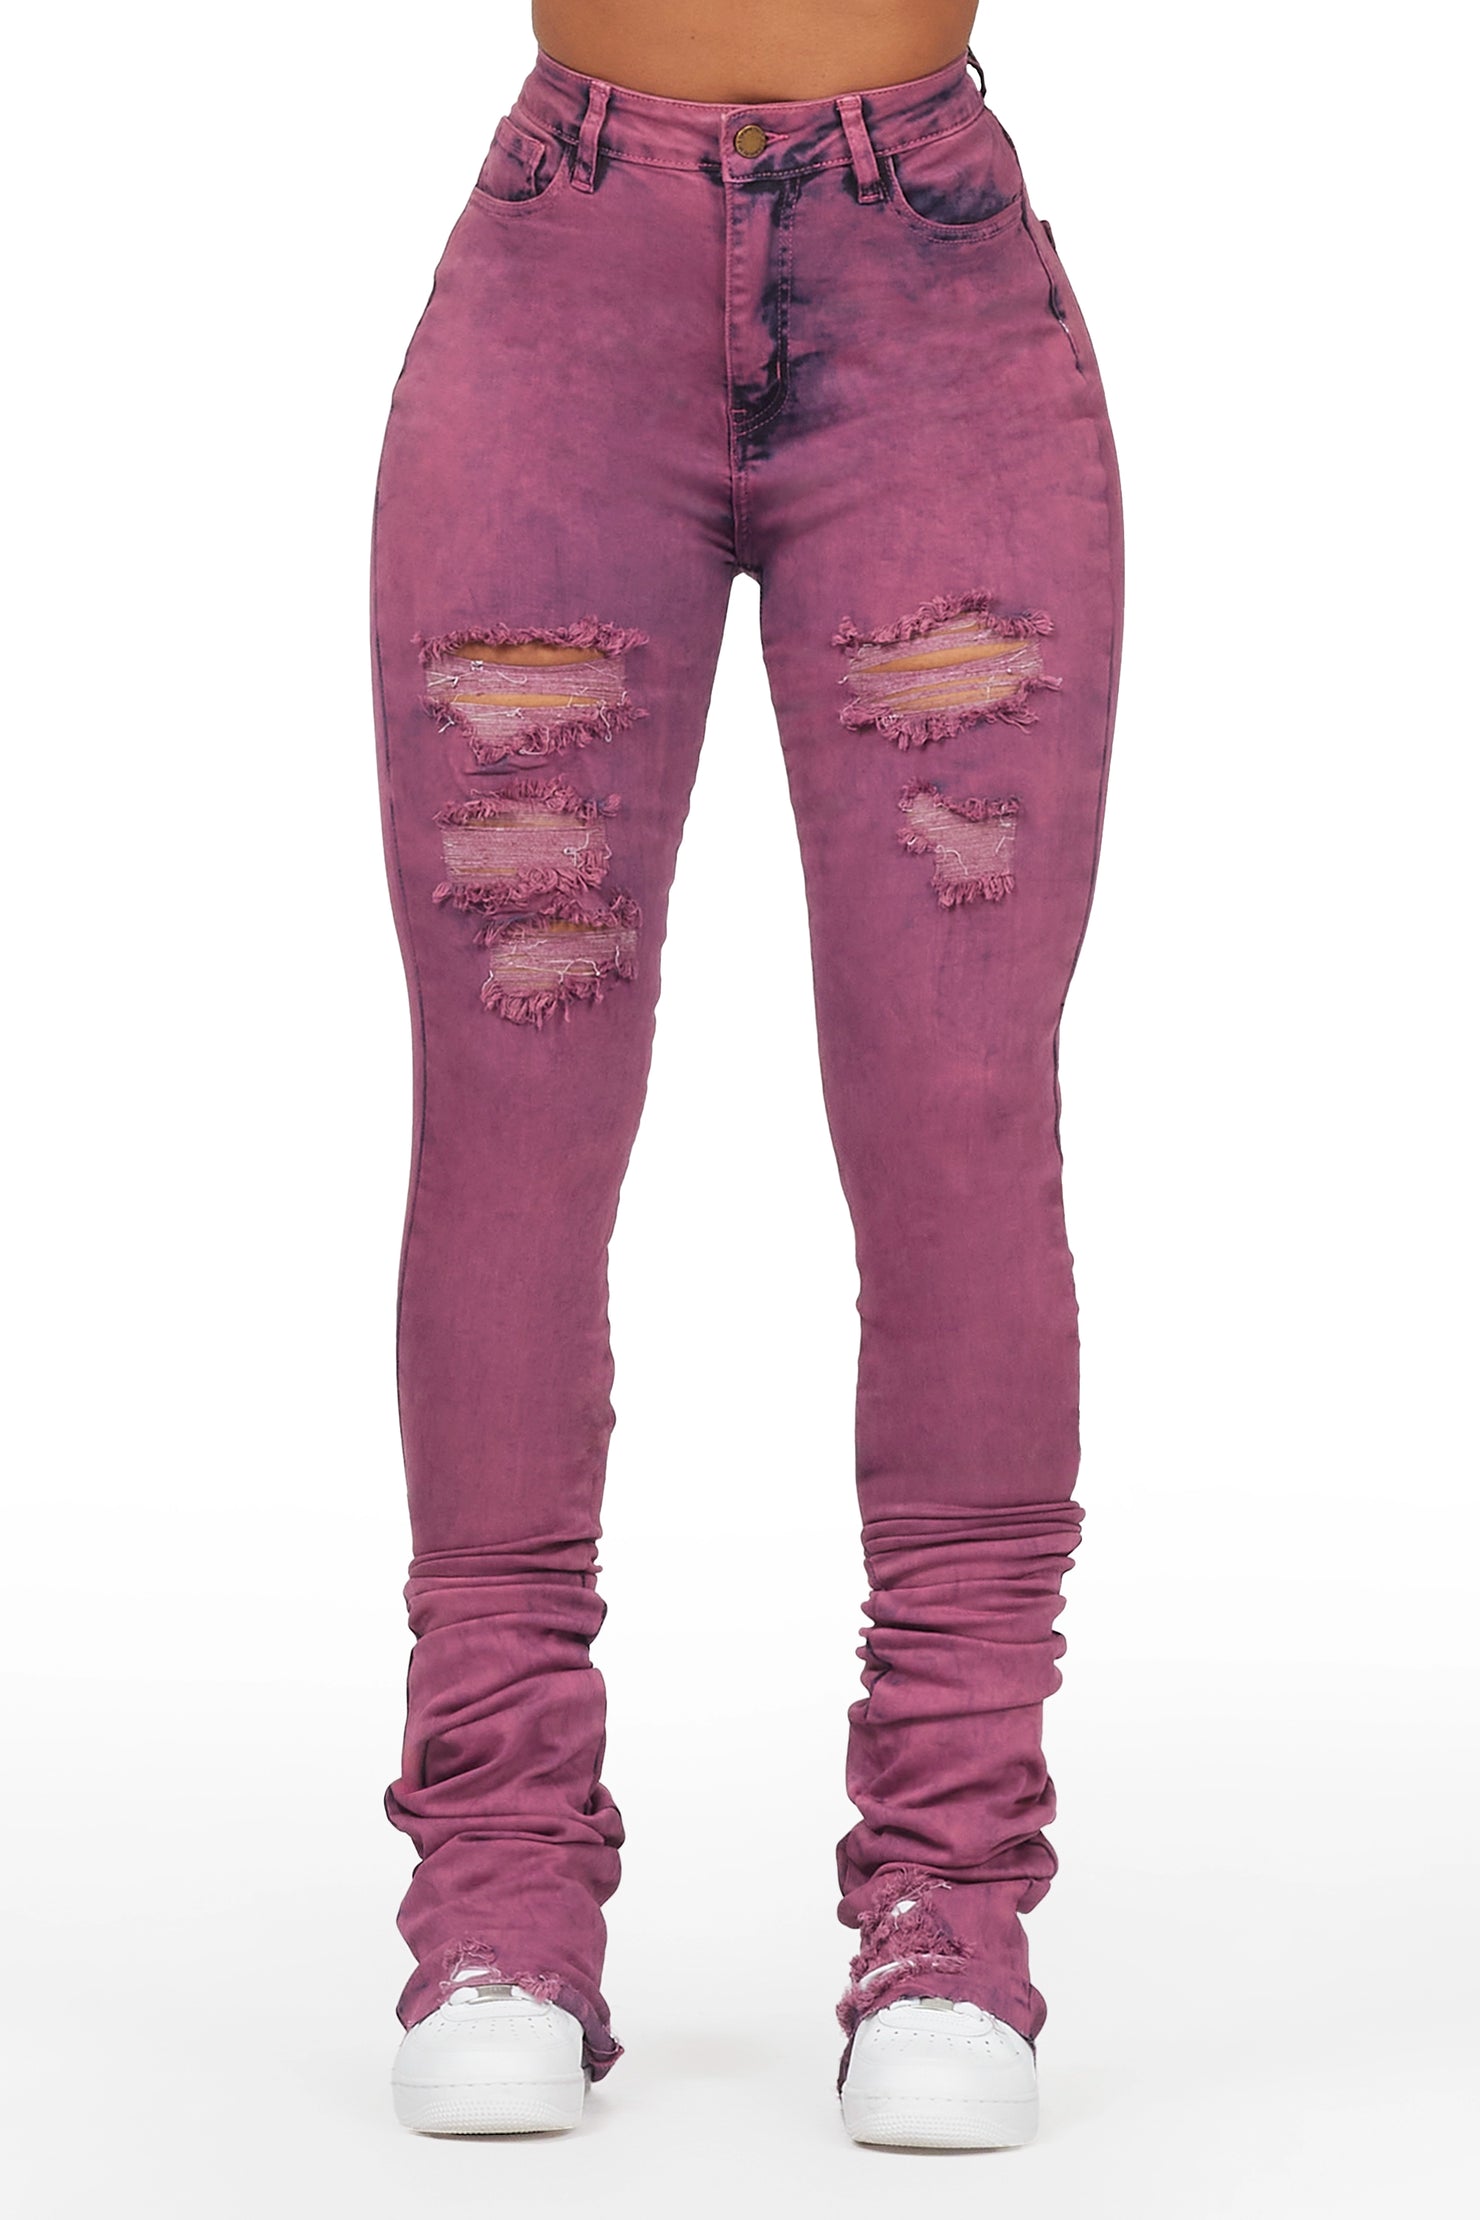 Danyale Purple Distressed Super Stacked Jean